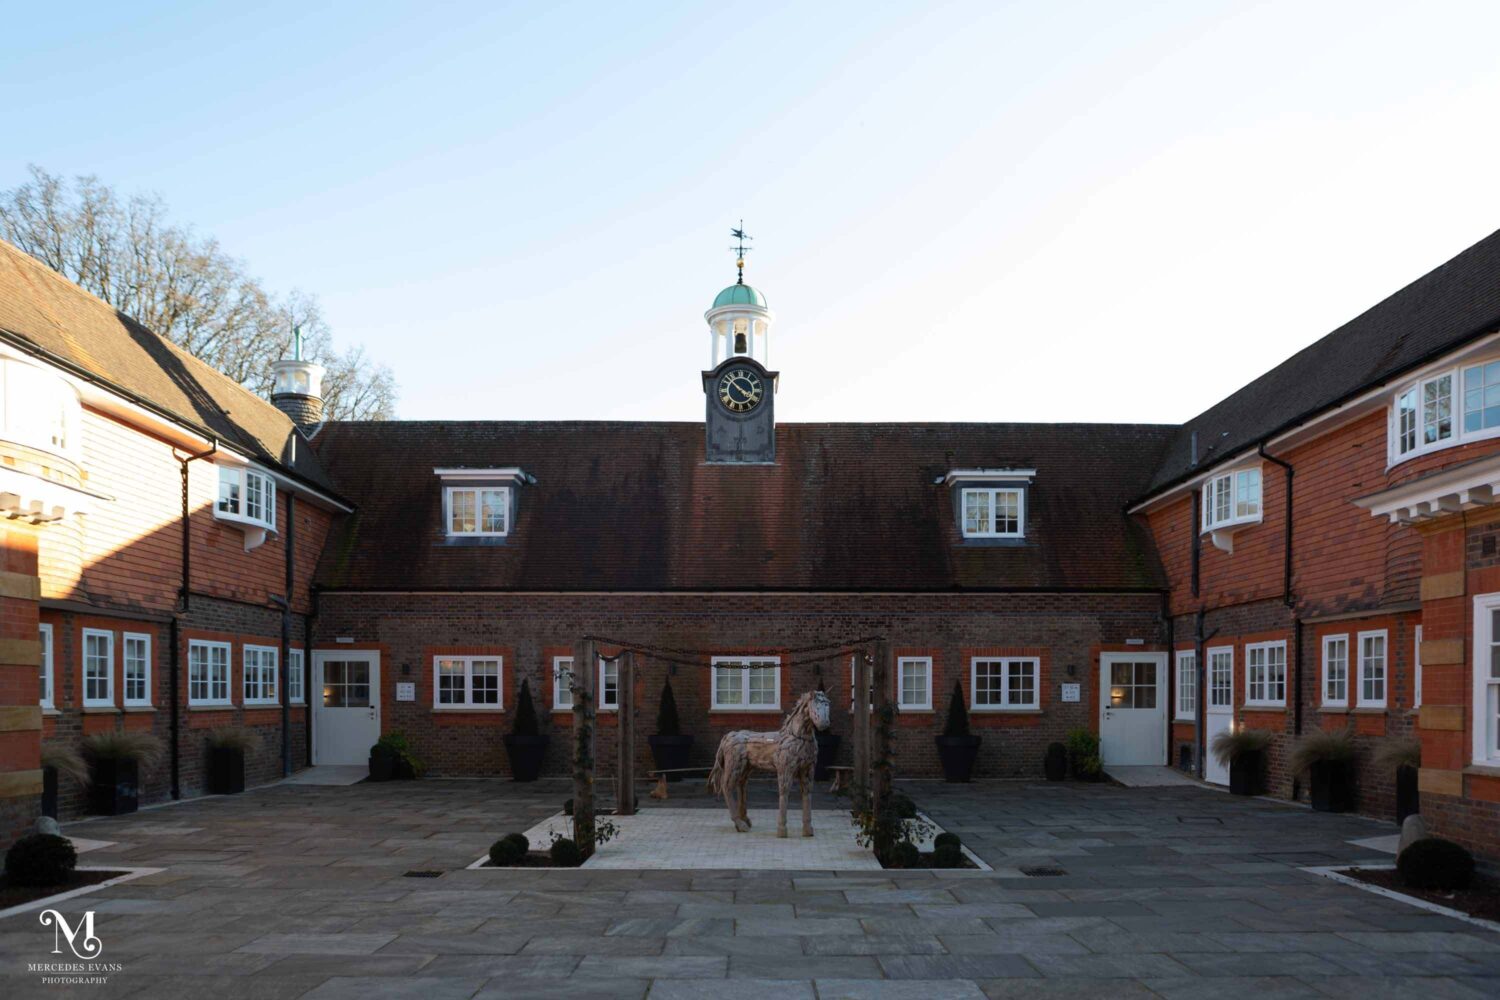 the Courtyard at Barnett Hill Hotel with the wooden horse sculpture